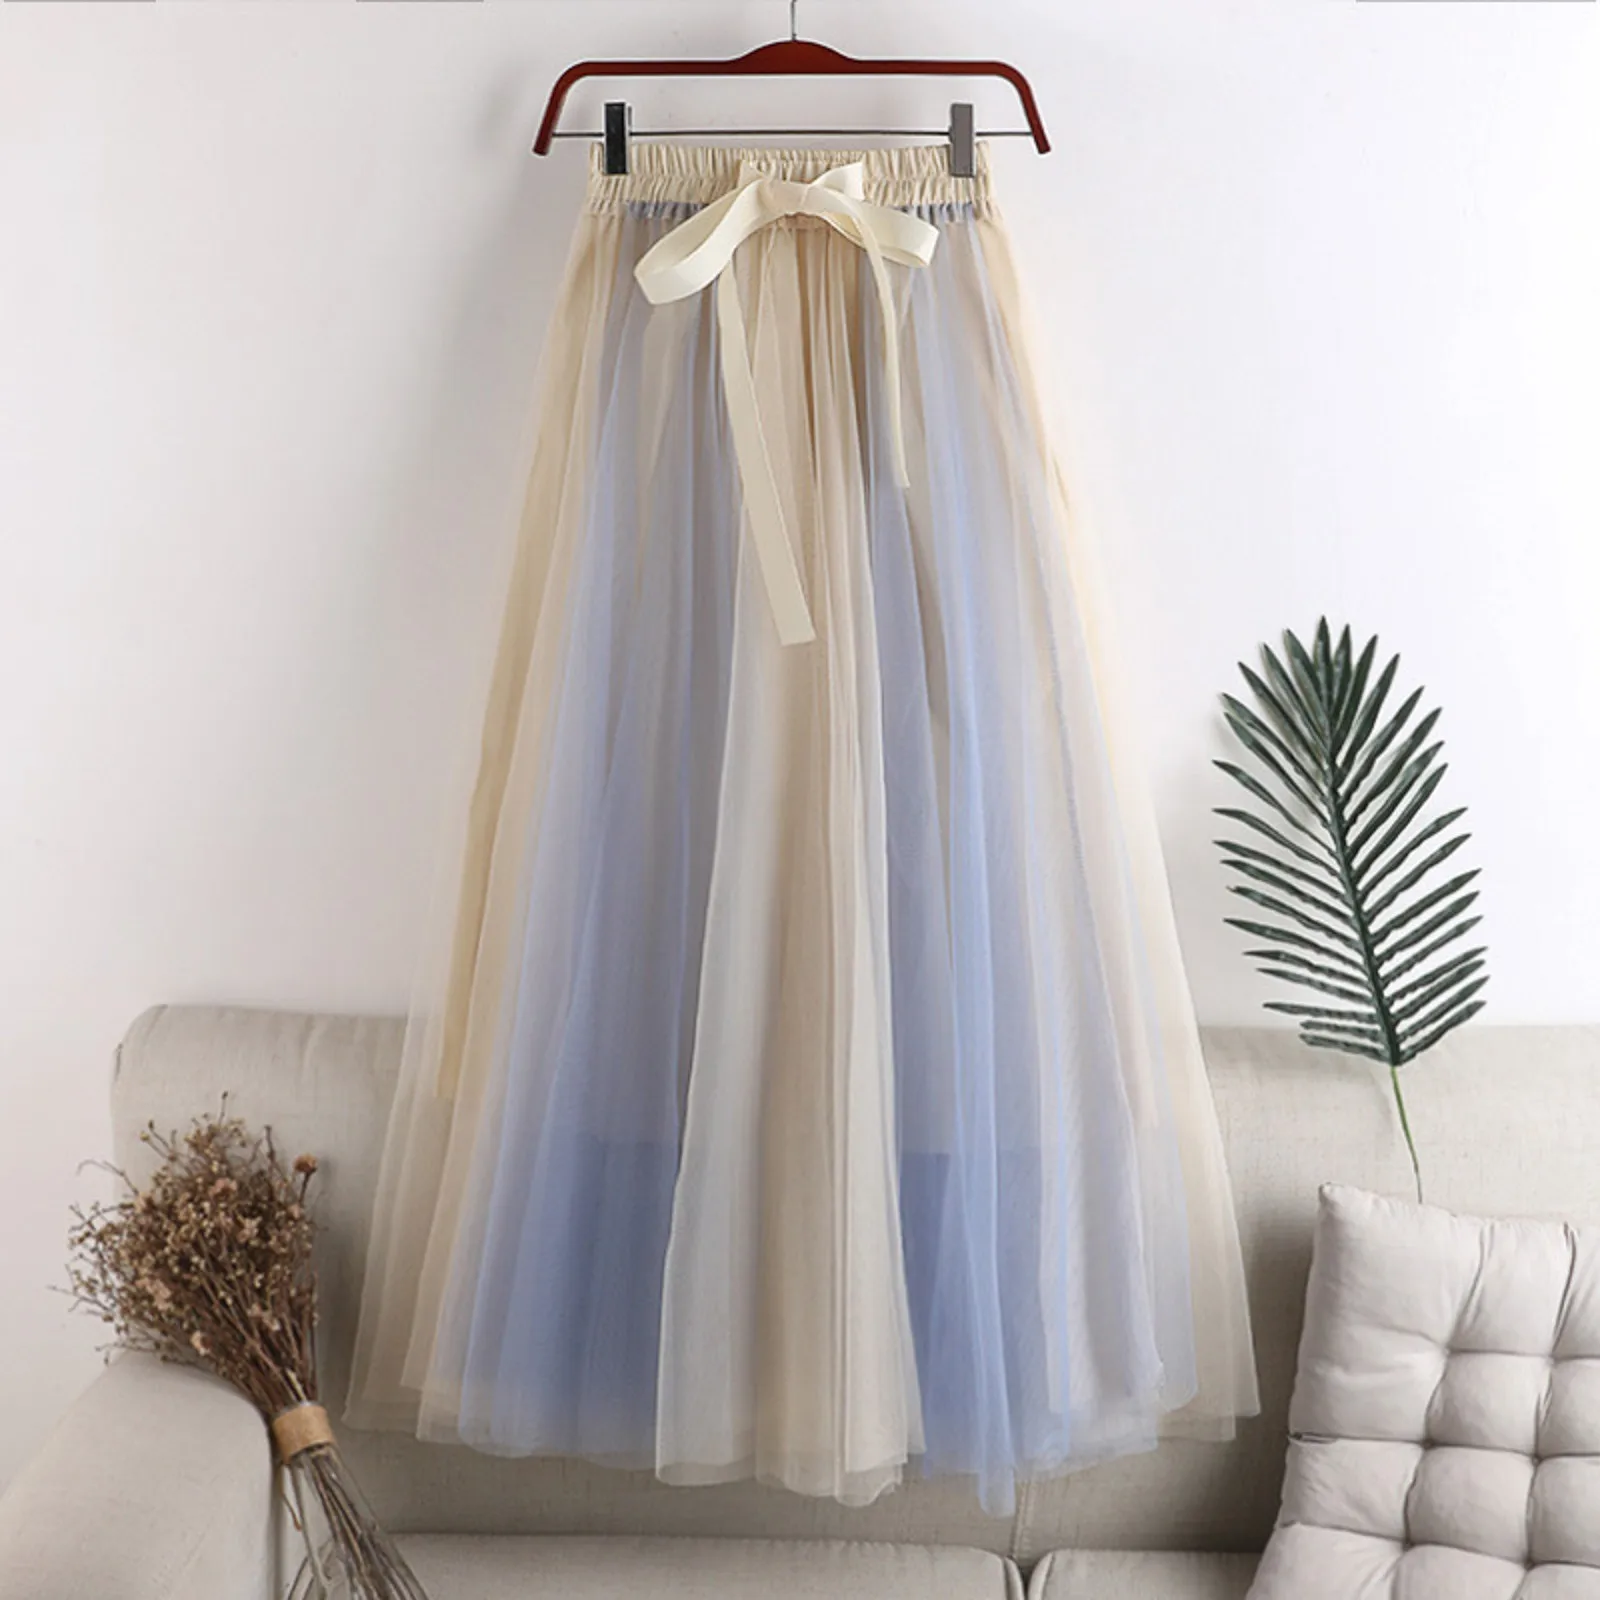 

A Line Tulle Party Tutu Skirt Stretchy High Waisted Flared Flattering Chic Maxi Puffy Lace Dancewear